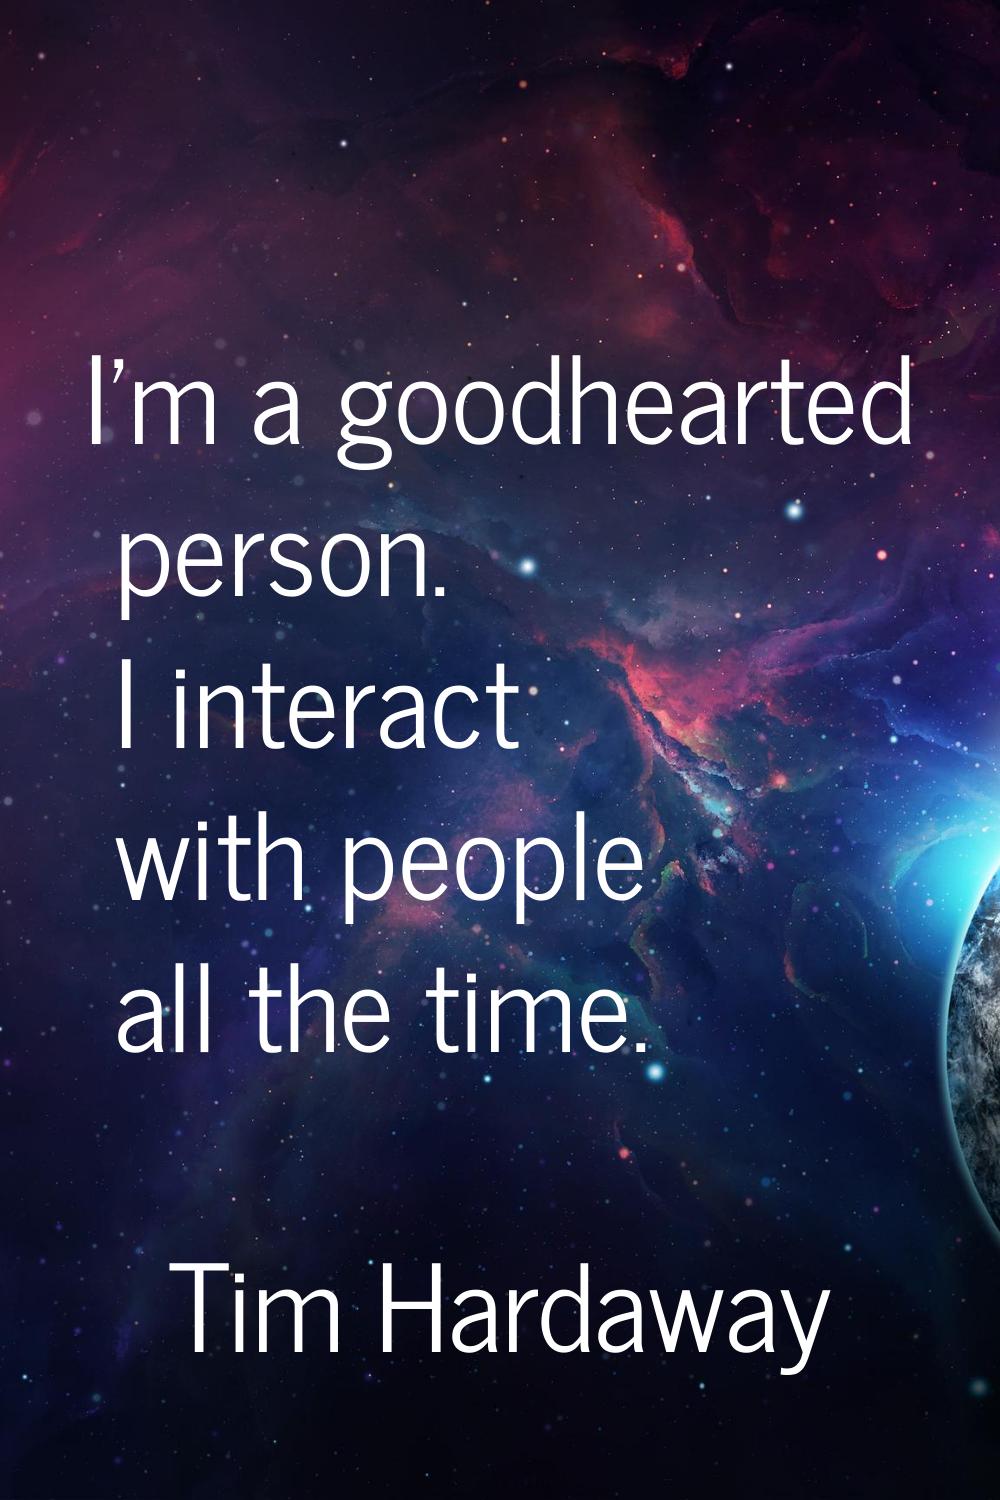 I'm a goodhearted person. I interact with people all the time.